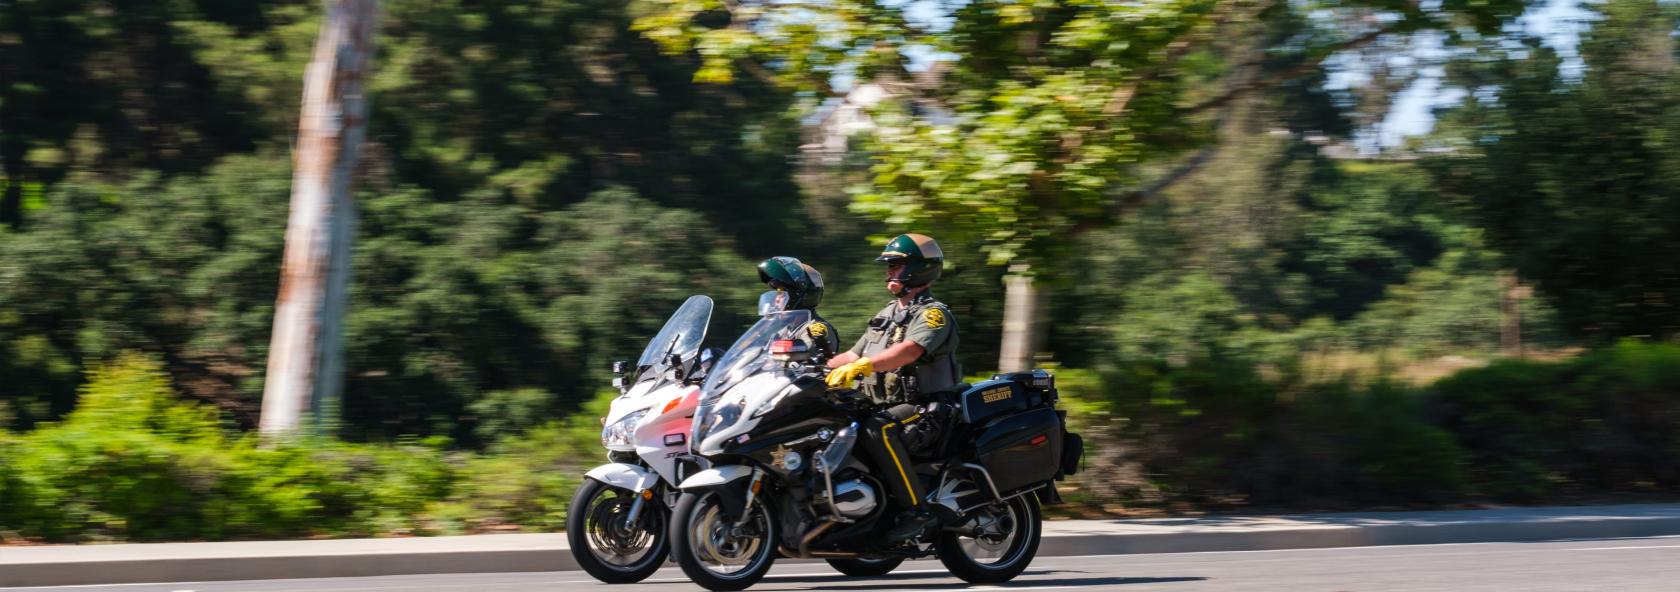 Two police officers driving motorcycles